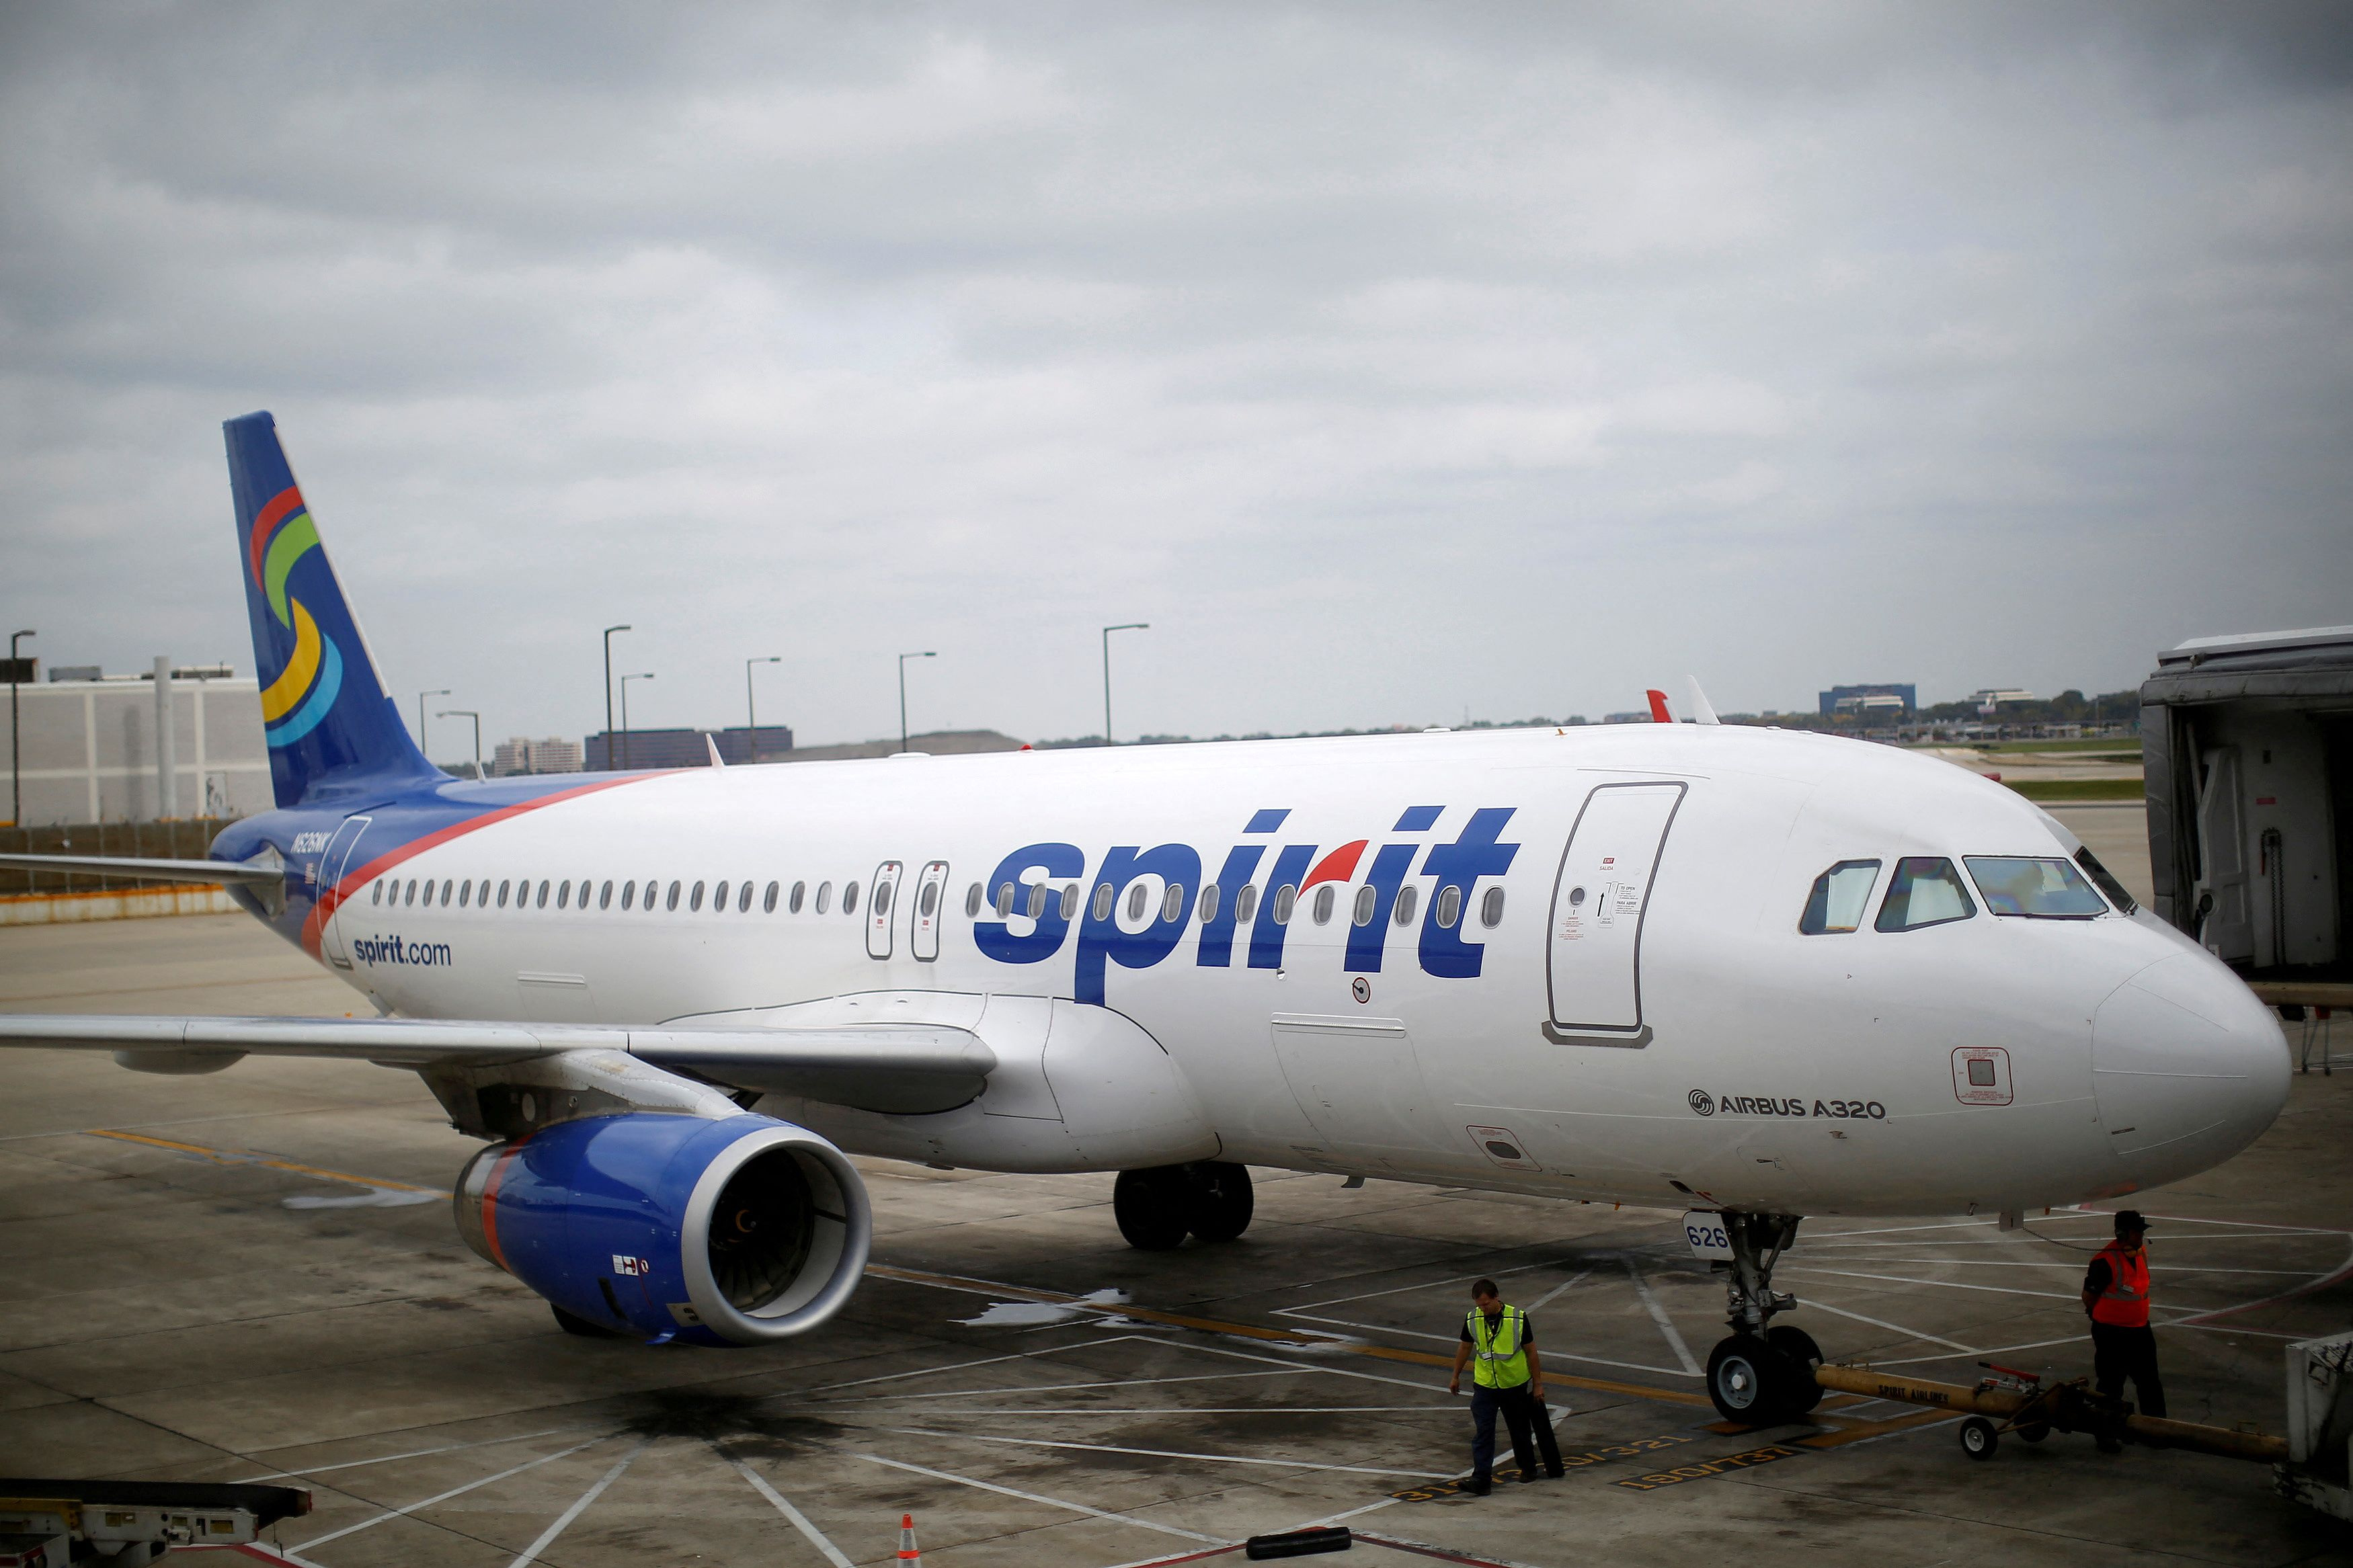 A Spirit Airlines A320-200 airplane sits at a gate at the O'Hare Airport in Chicago, Illinois, U.S.